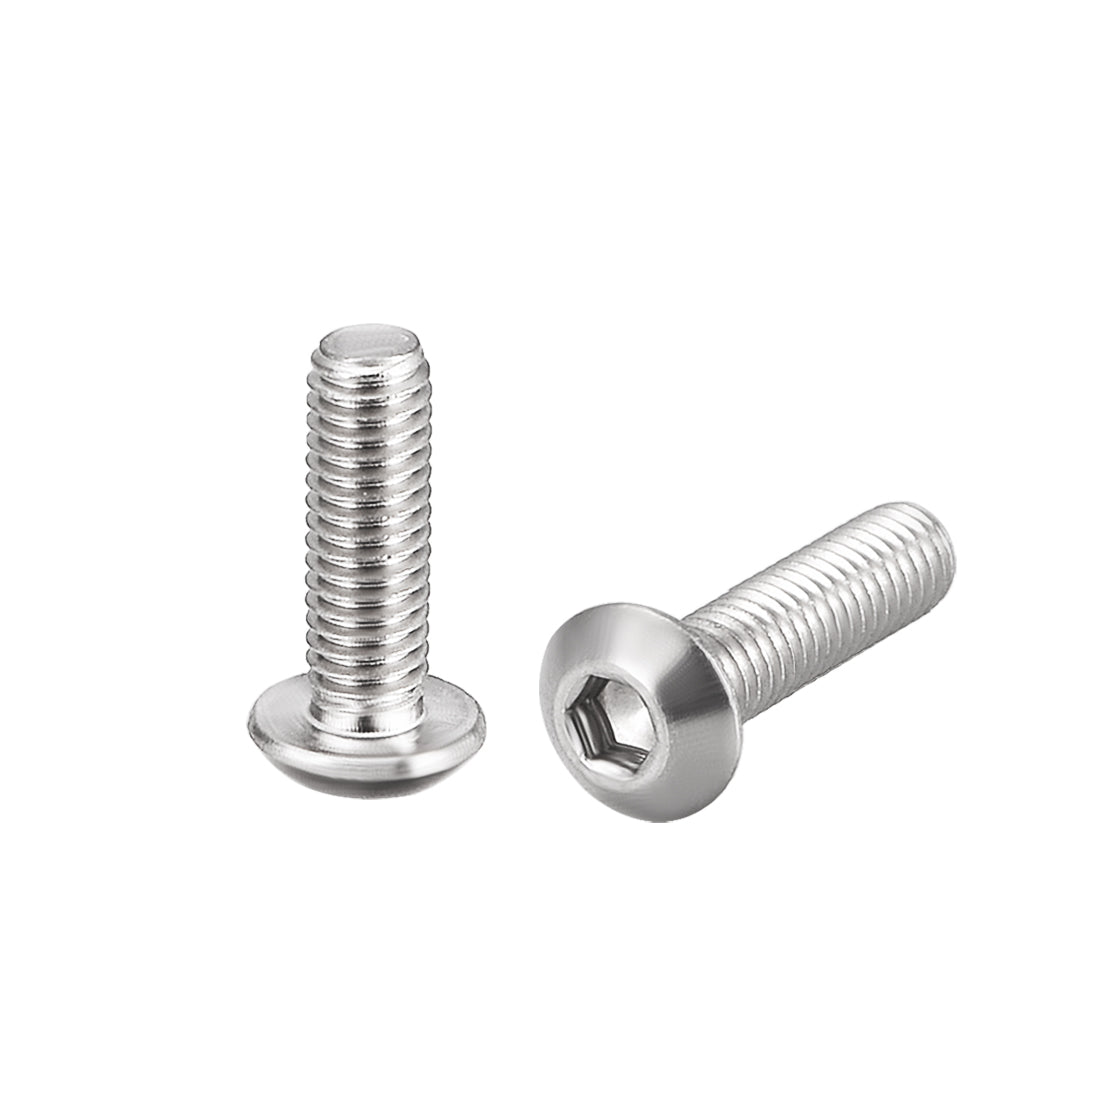 uxcell Uxcell M3x10mm Machine Screws Hex Socket Round Head Screw 304 Stainless Steel Fasteners Bolts 20pcs